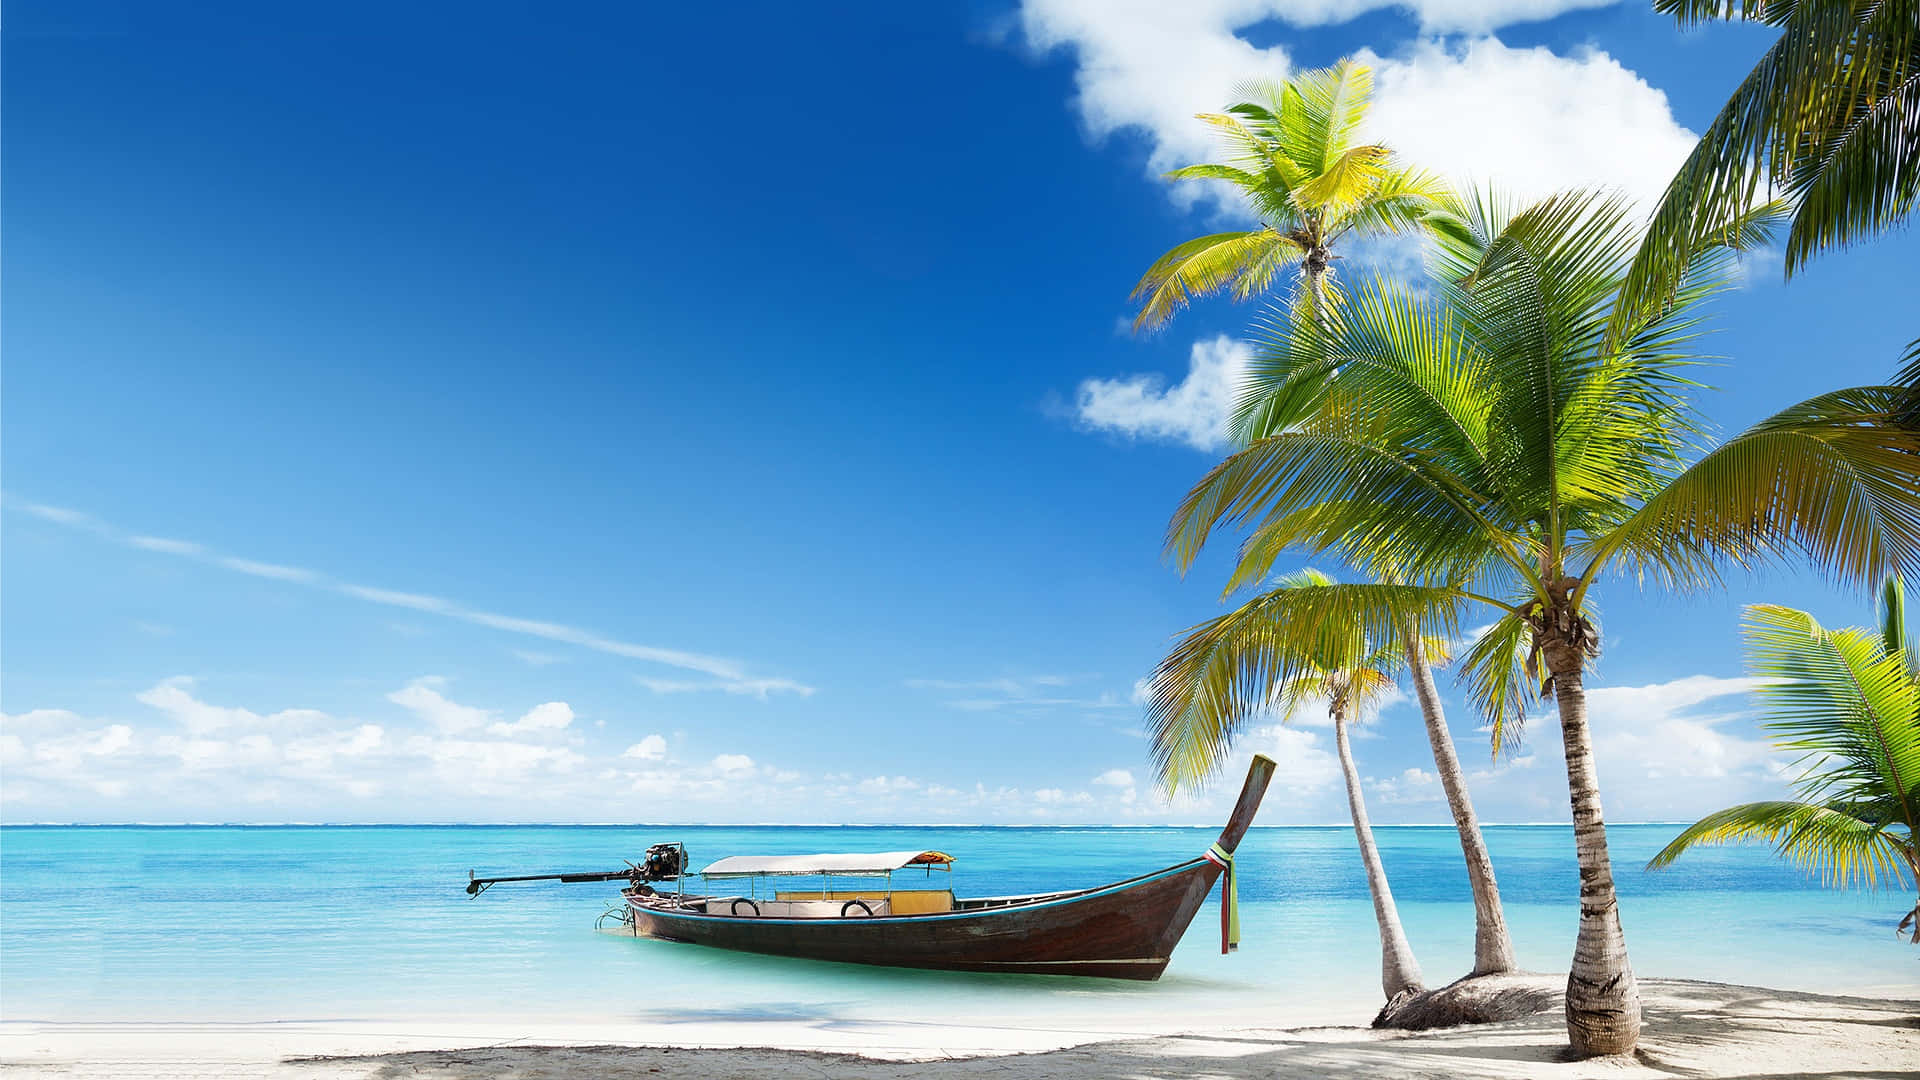 Take a break from your busy life and relax on a beautiful beach. Wallpaper